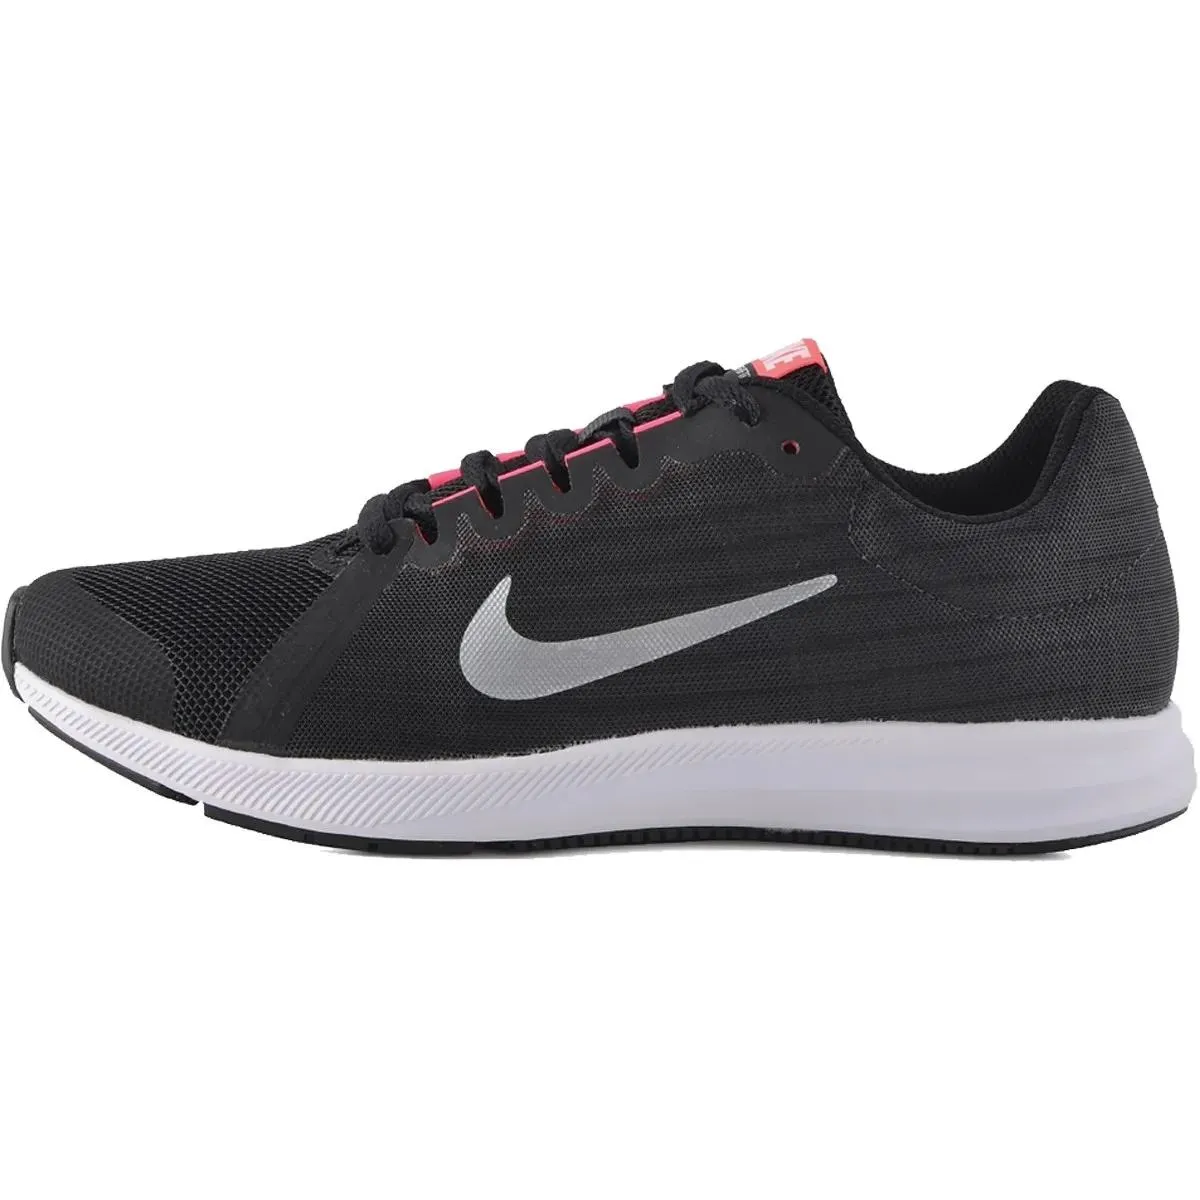 Nike Tenisice DOWNSHIFTER 8 (GS) 